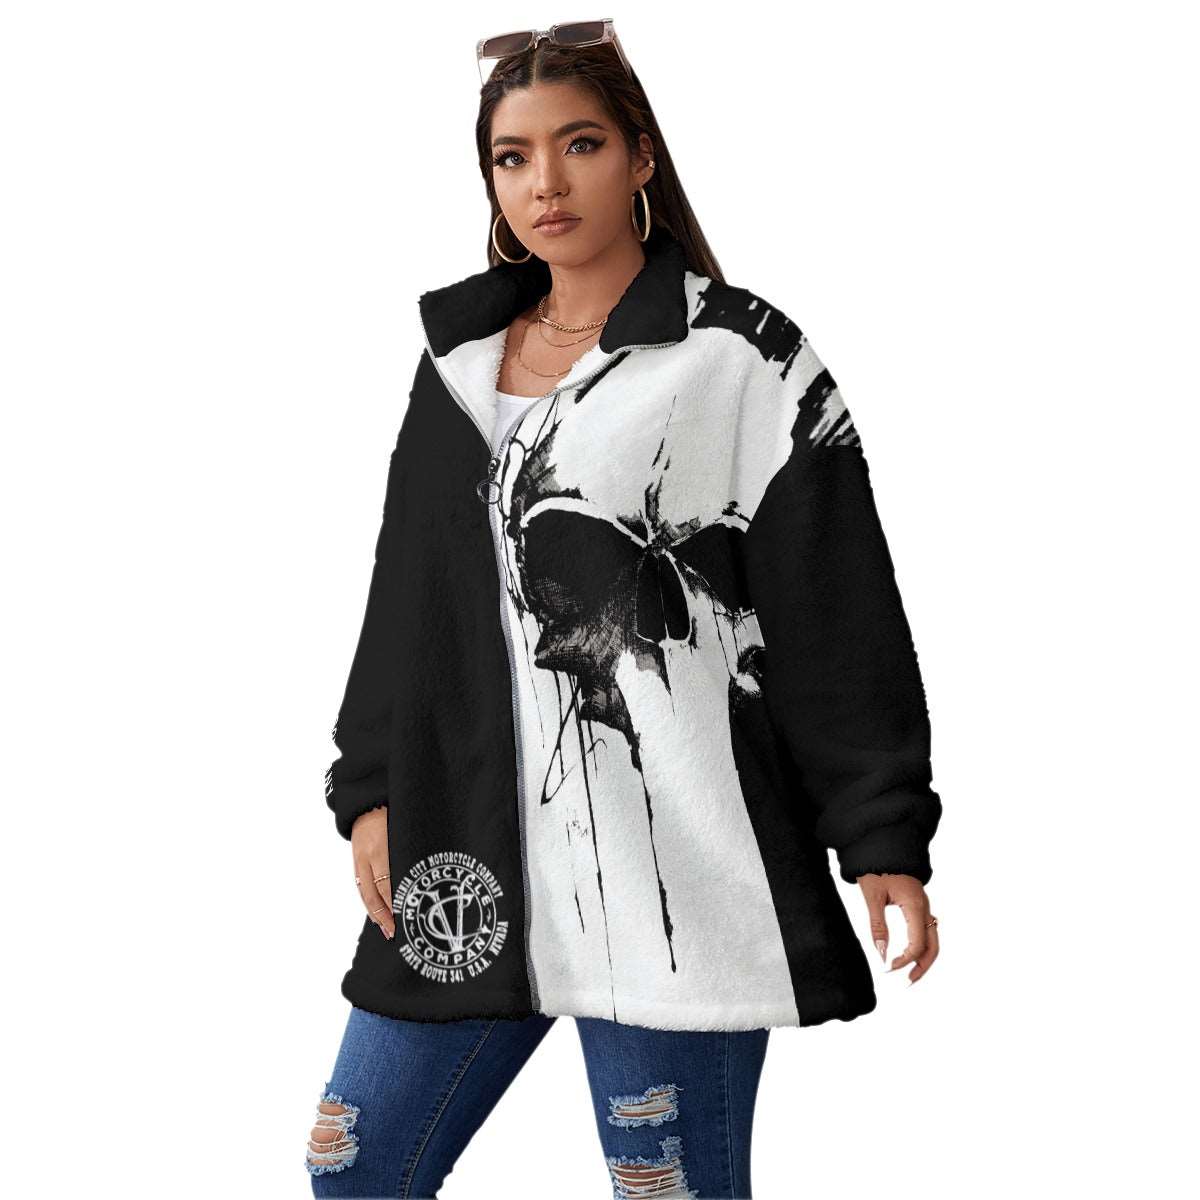 Black and White Skull - Oversize Fuzzy Fleece Zip Up (Plus Size) Hoodie Virginia City Motorcycle Company Apparel 